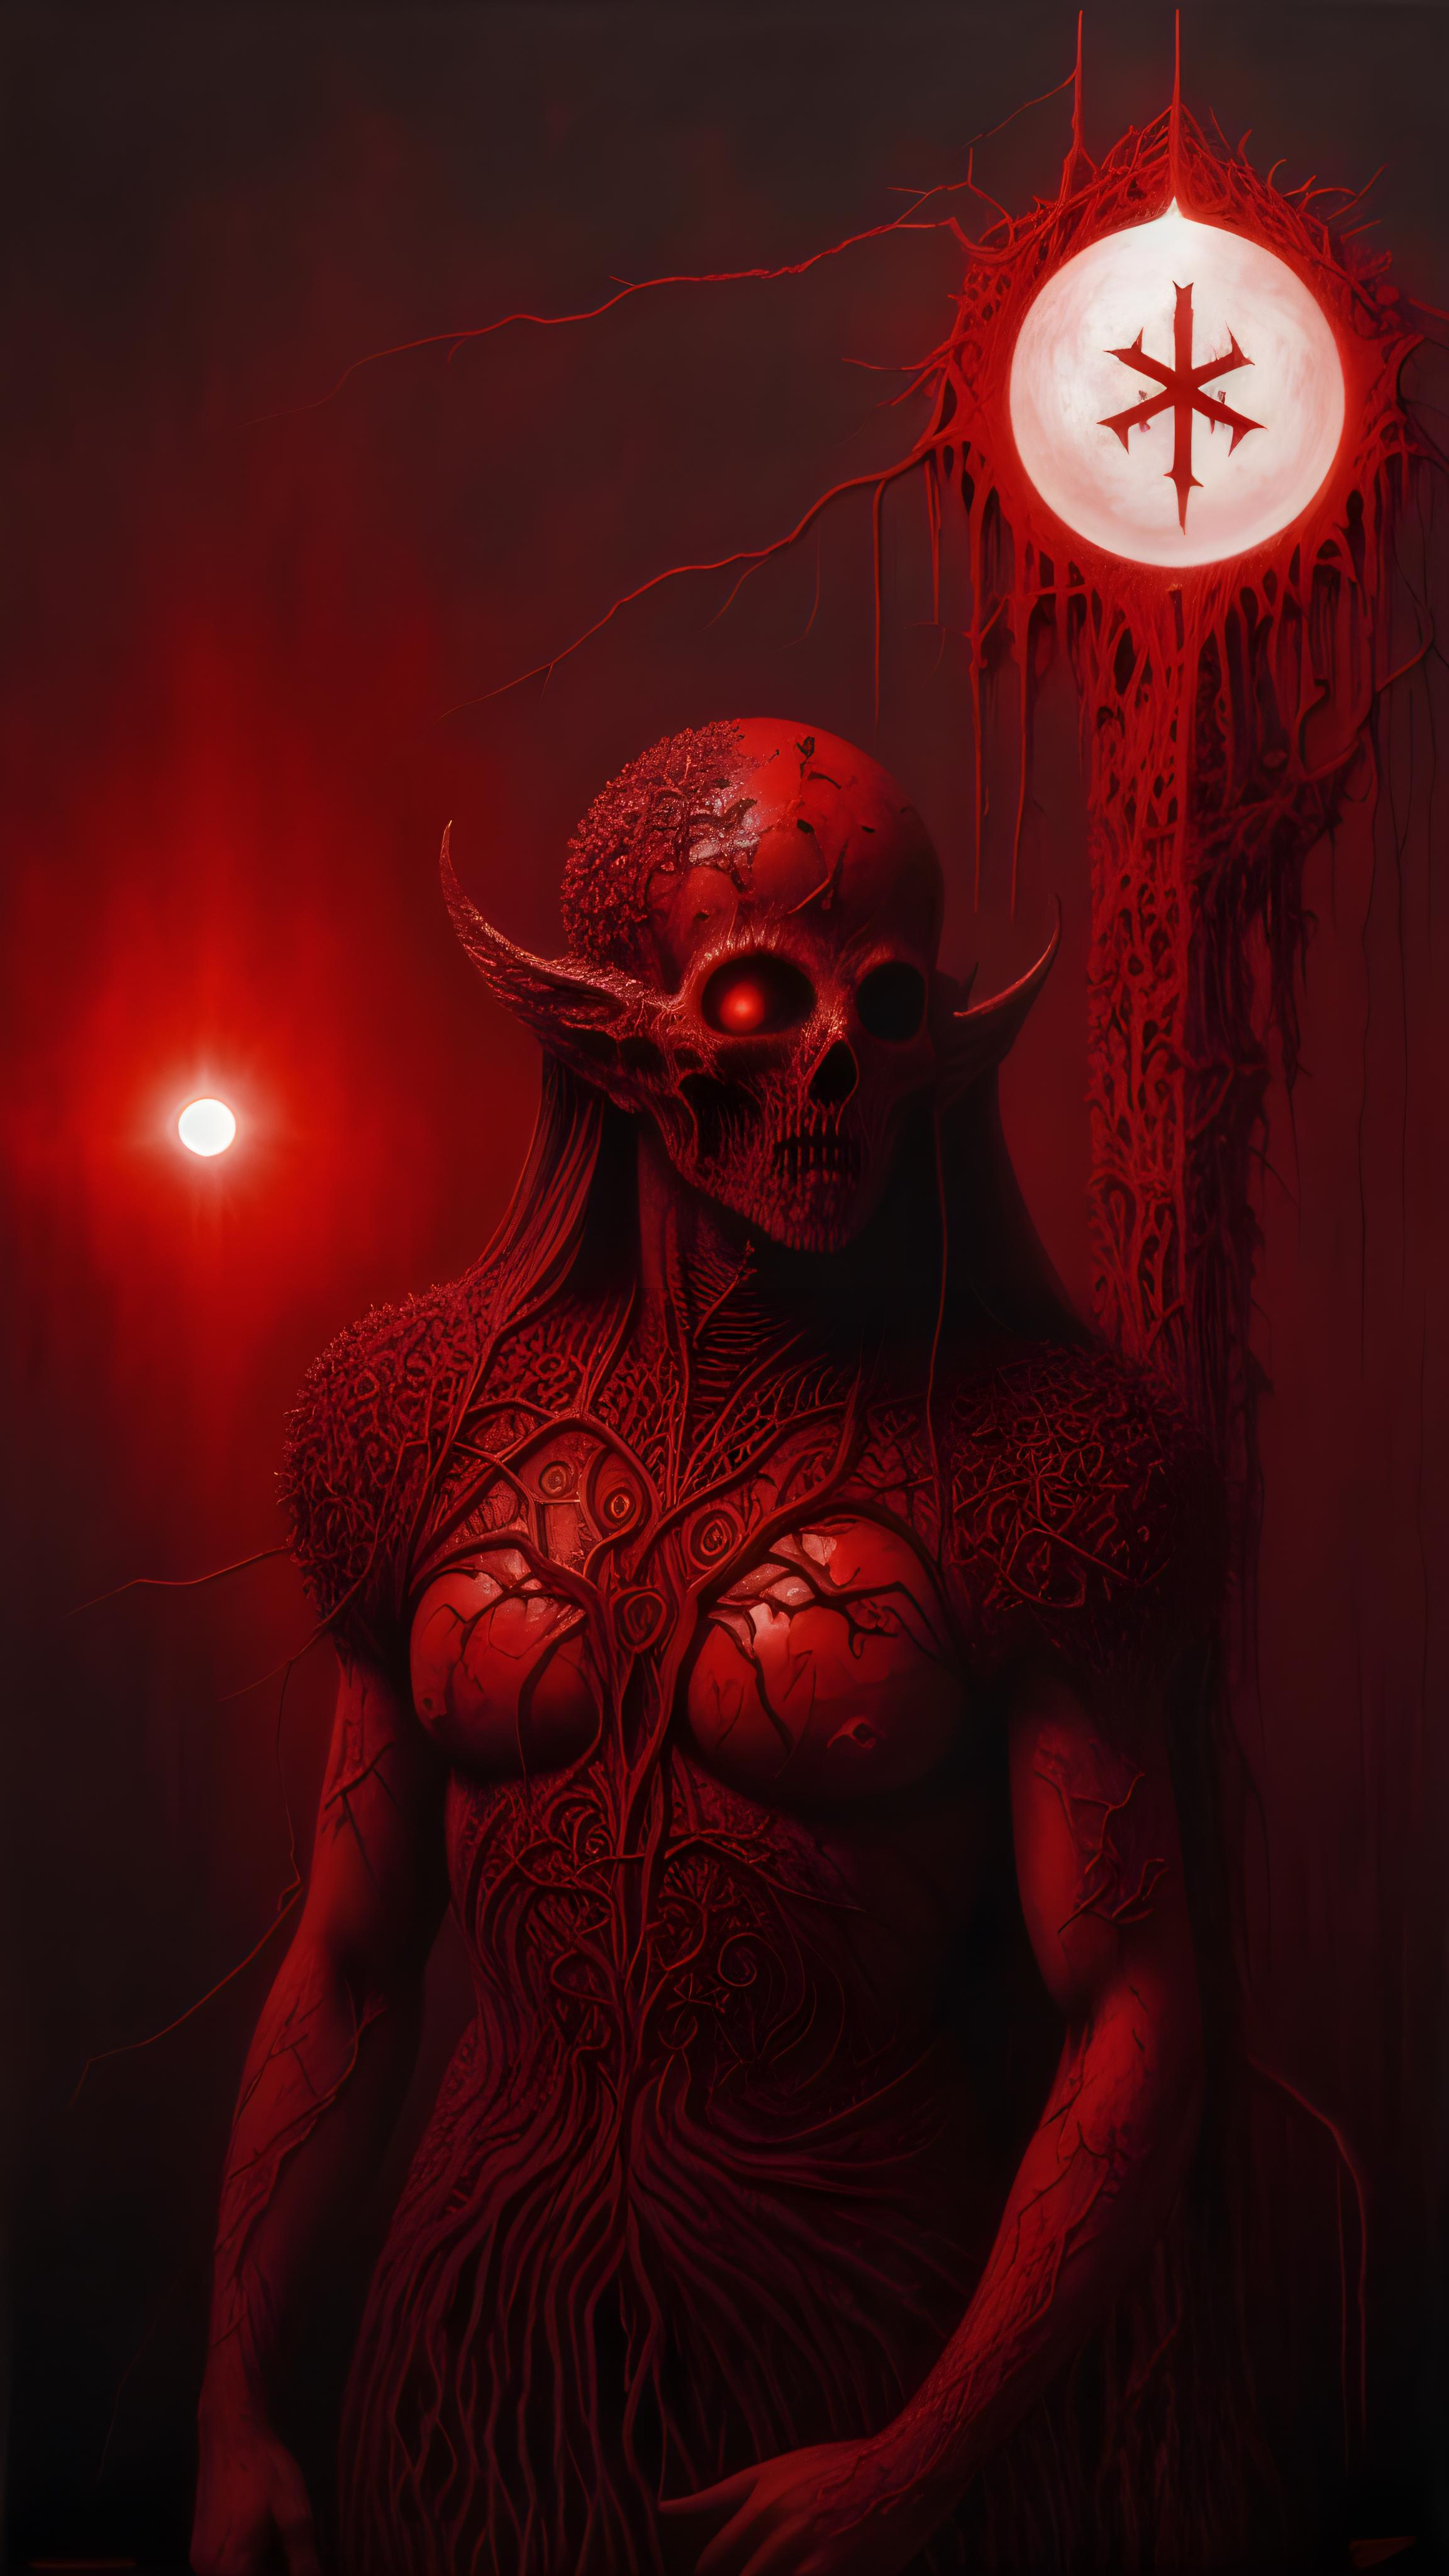 A red and black painting of a demonic character with a sun in the background.